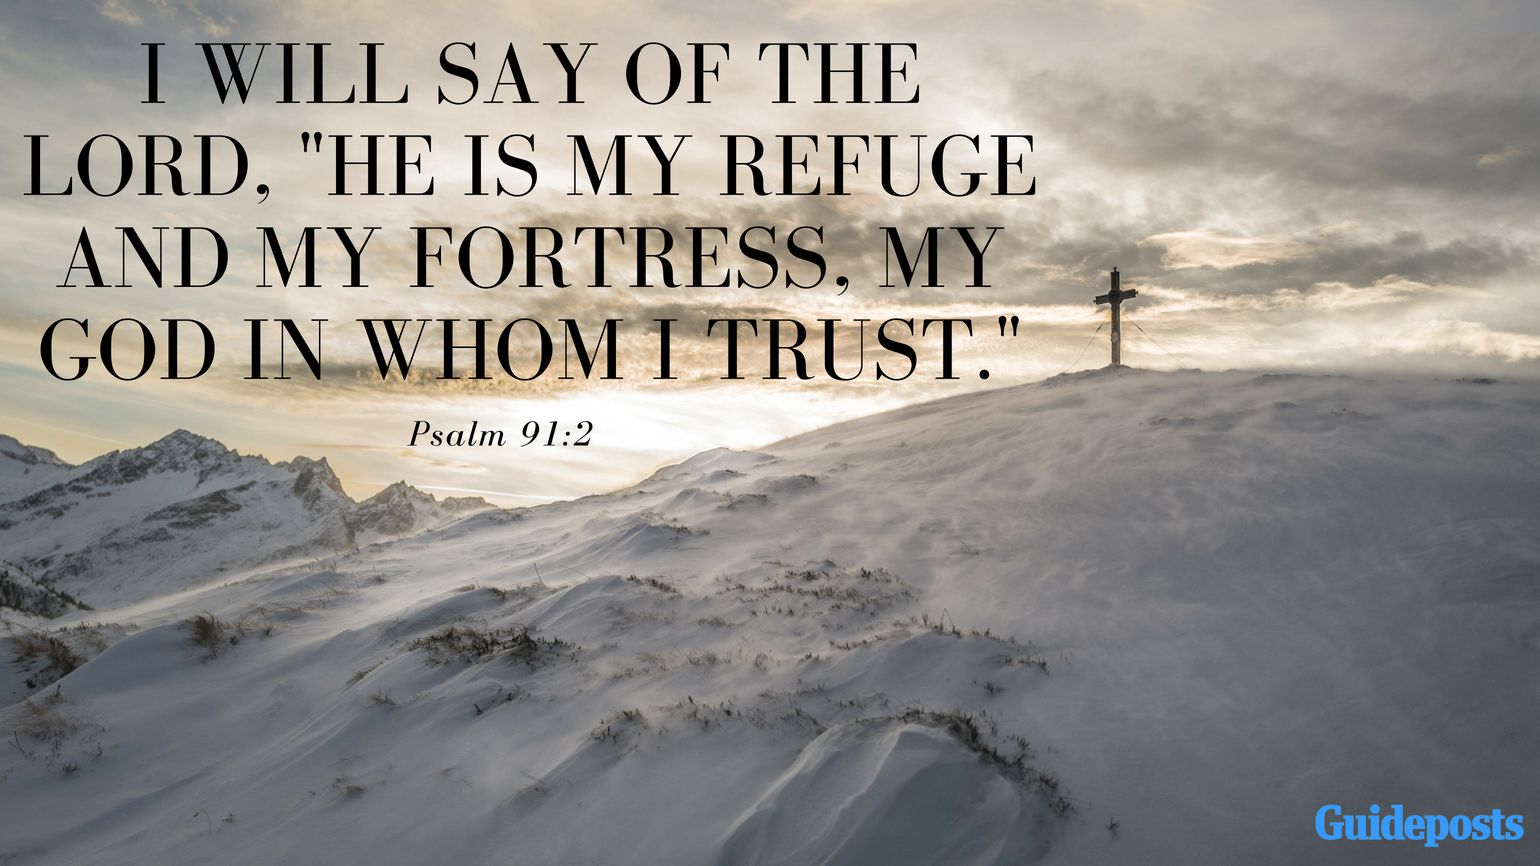 I will say of the Lord, "He is my refuge and my fortress, my God in whom I trust." Psalm 91:2